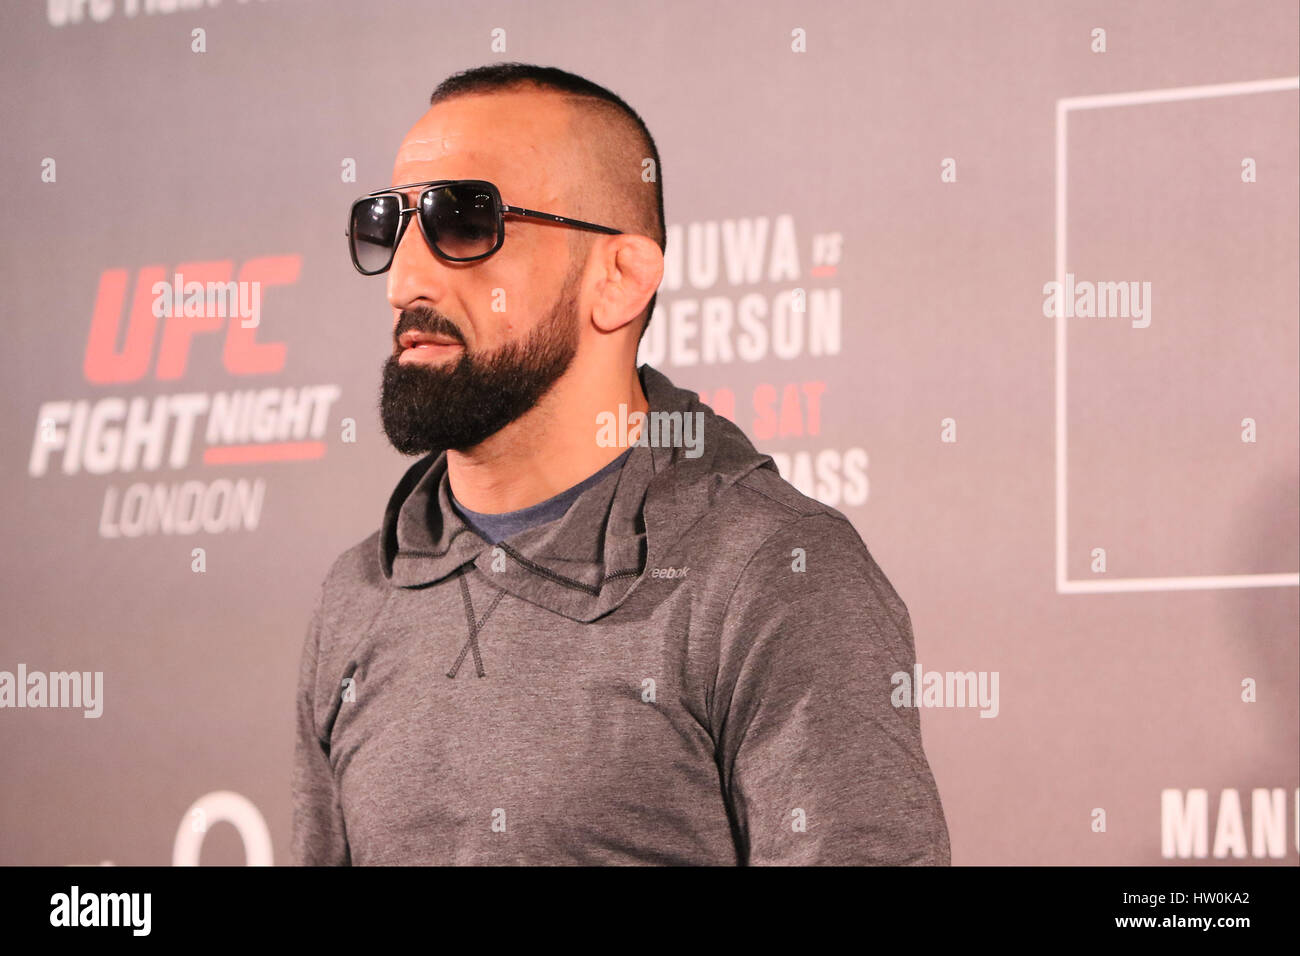 London, UK. 16th Mar, 2017. Reza Madadi ahead of his upcoming fight during UFC London: Media Day at Glazers Hall, London, England. Photo by Dan Cooke.16 December 2017 Credit: Dan Cooke/Alamy Live News Stock Photo